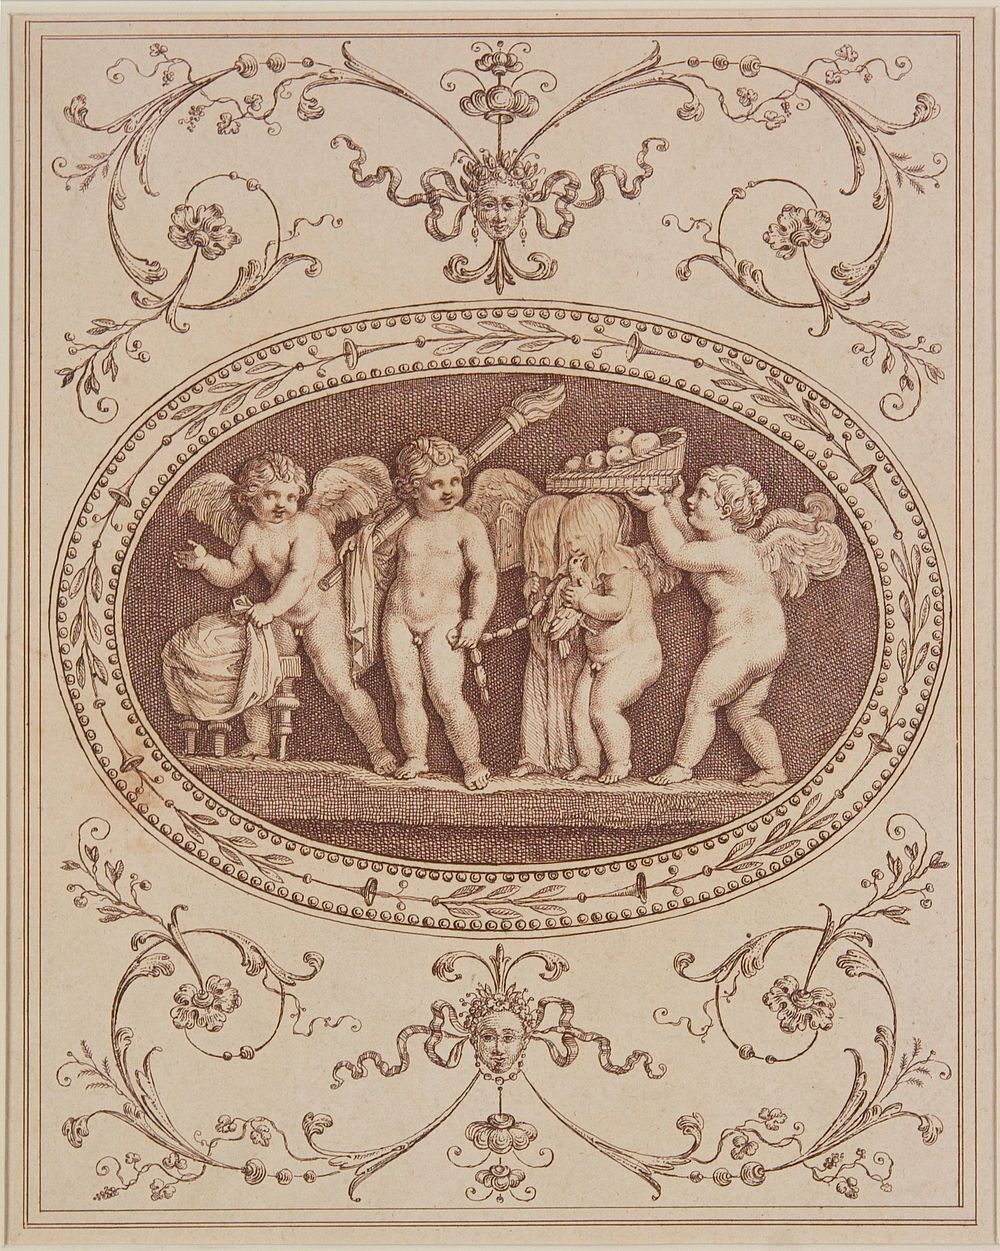 The Marriage of Psyche and Cupid, from The Gems of Marlborough (1789-1790) by Francesco Bartolozzi. Original from The…